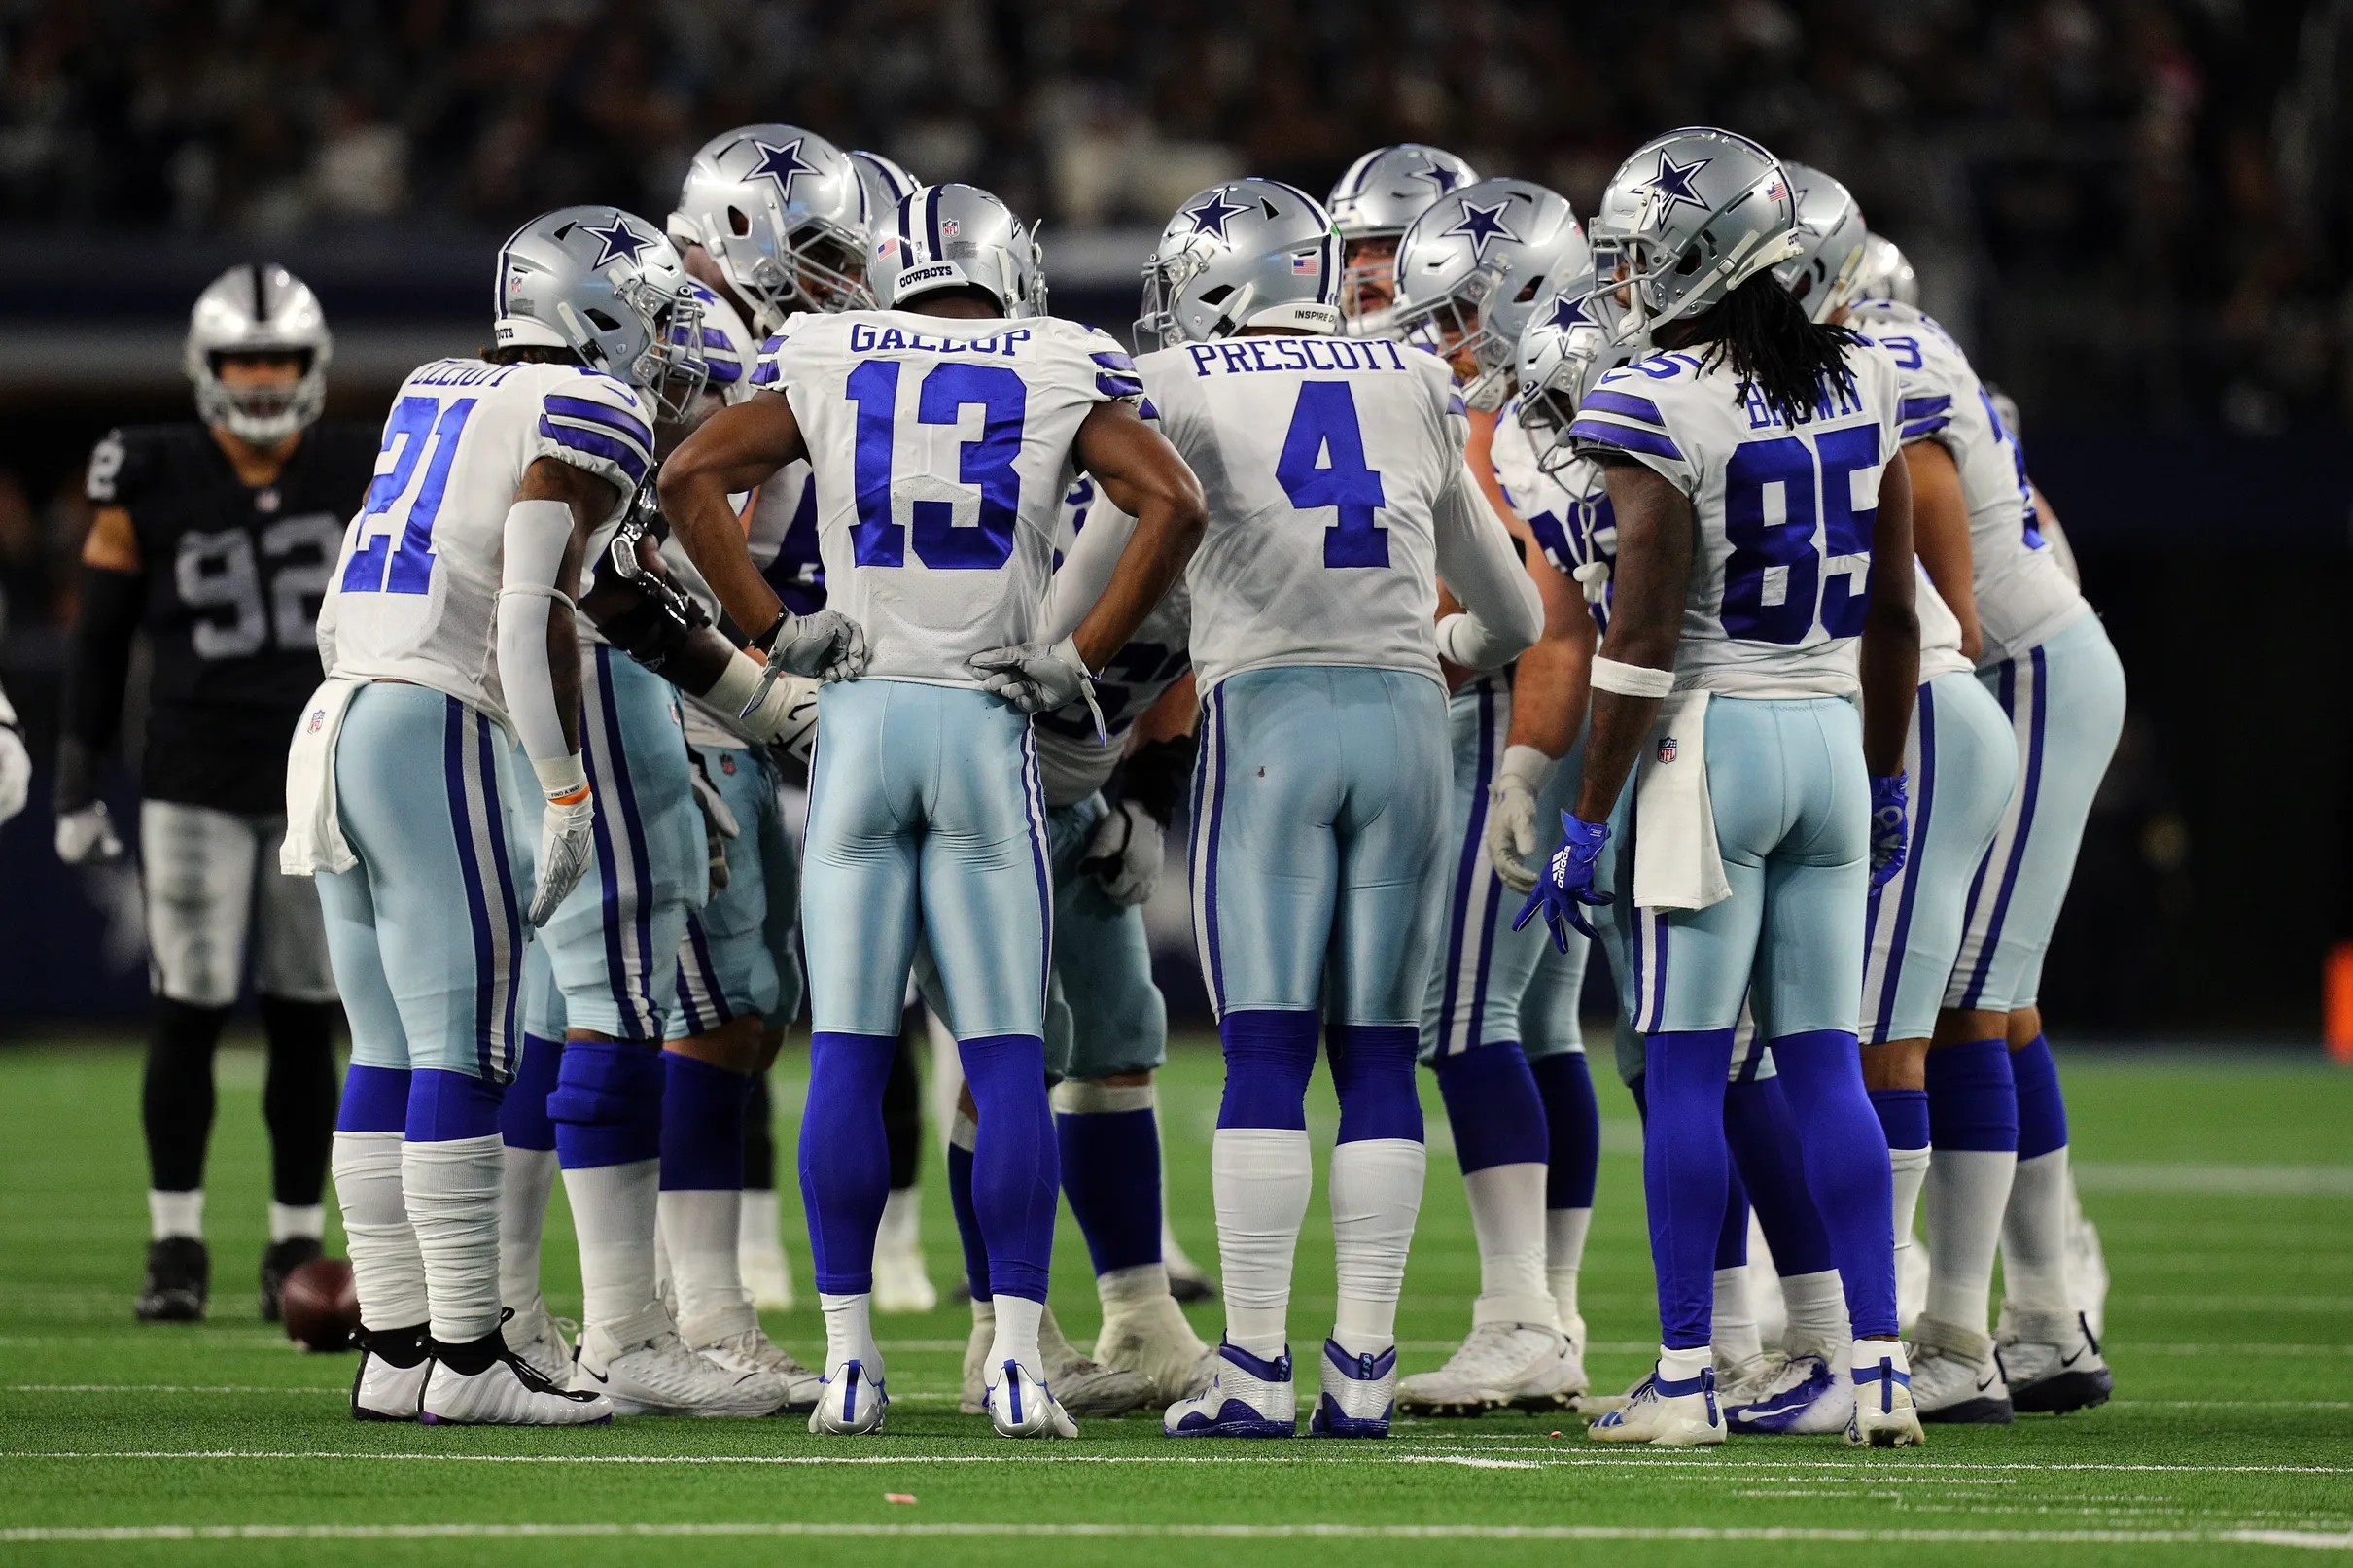 Projecting the Cowboys starting offensive lineup for 2022 based on